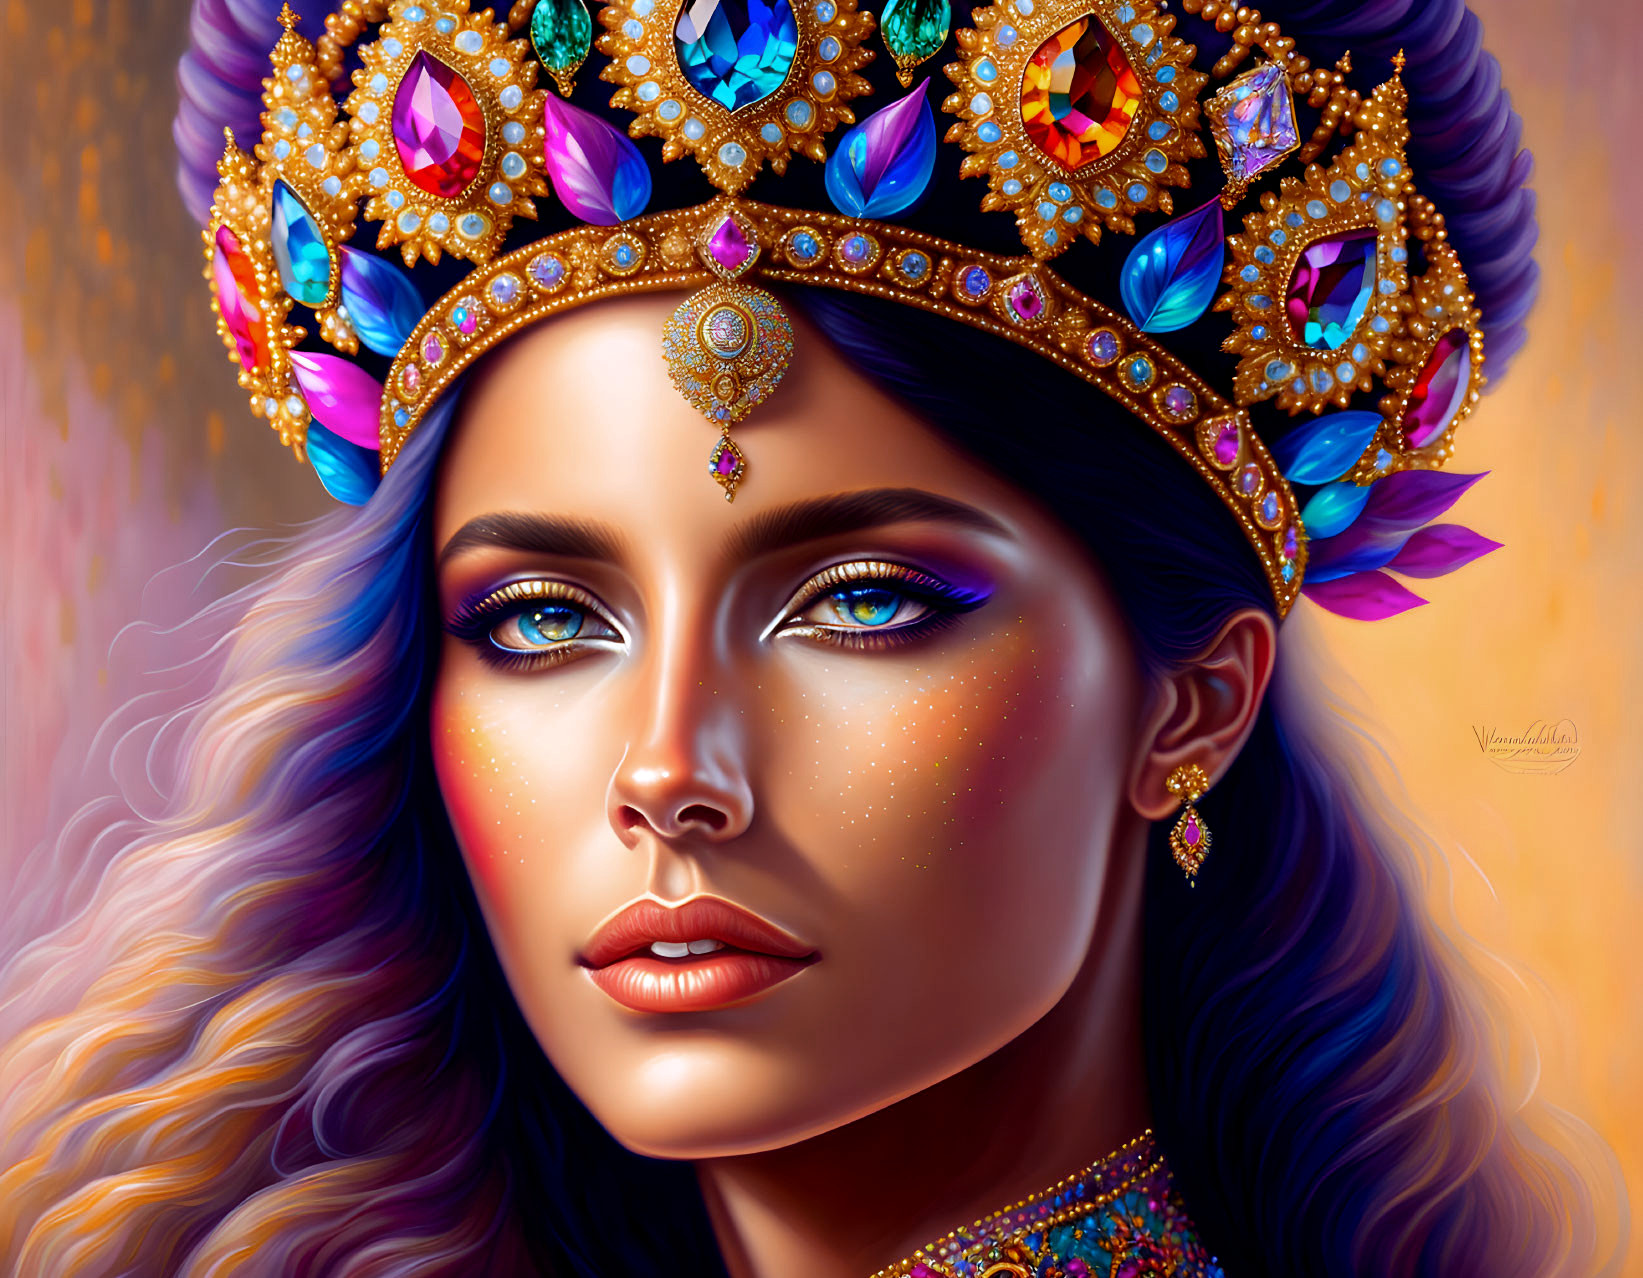 Vibrant Blue-Eyed Woman in Colorful Crown and Earrings